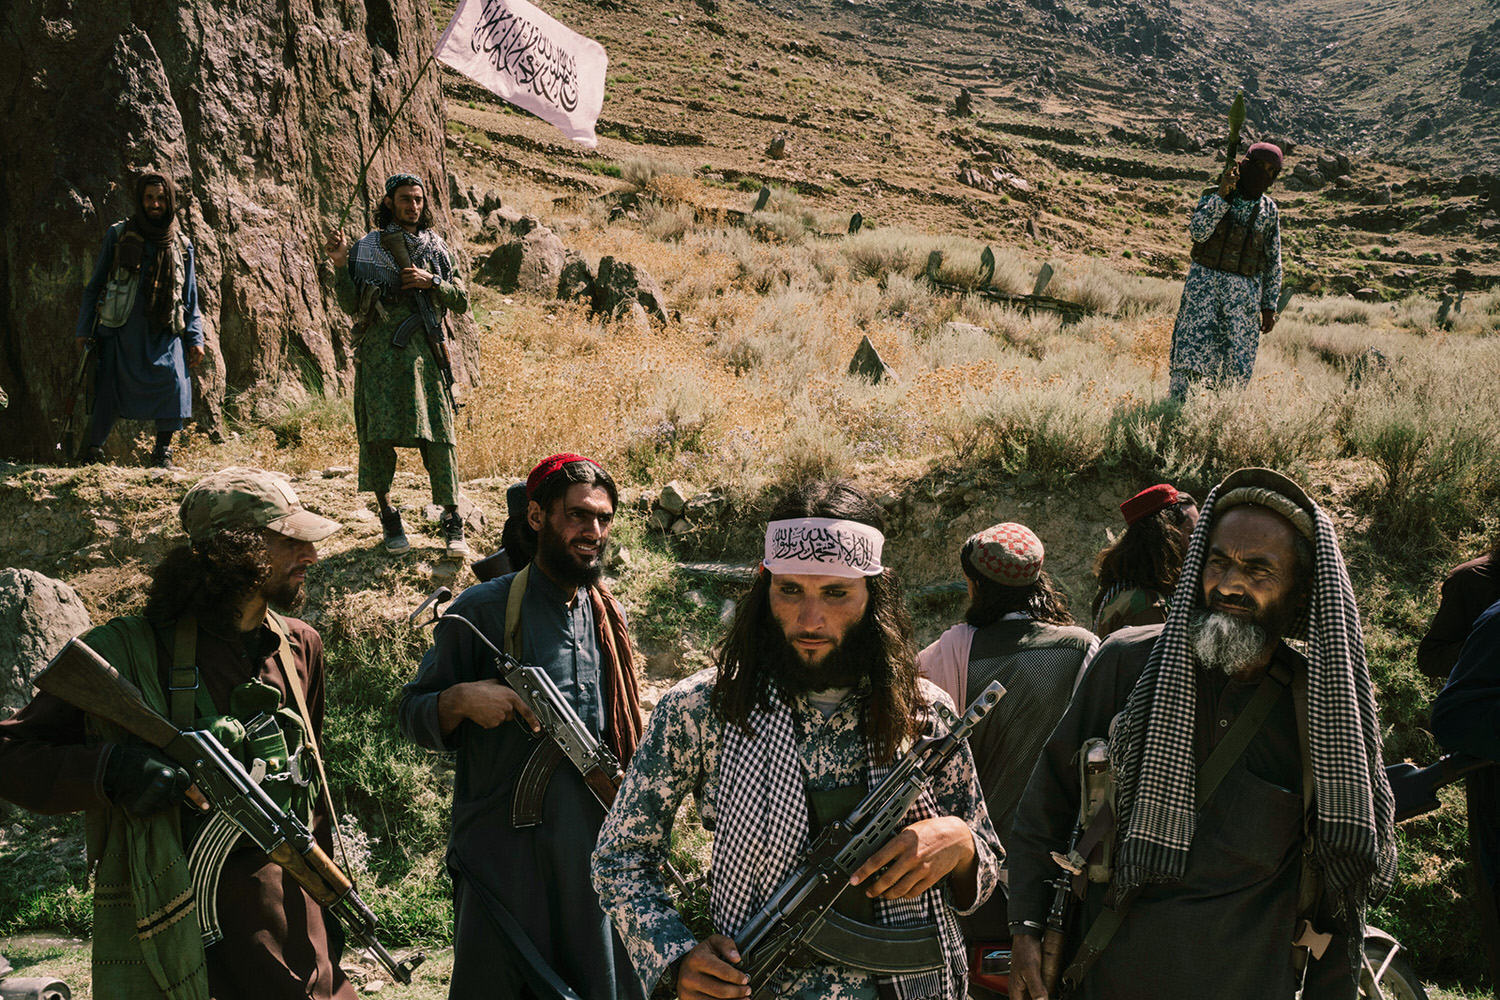 AfghanistanPapers INS3 11 Talibanfighters